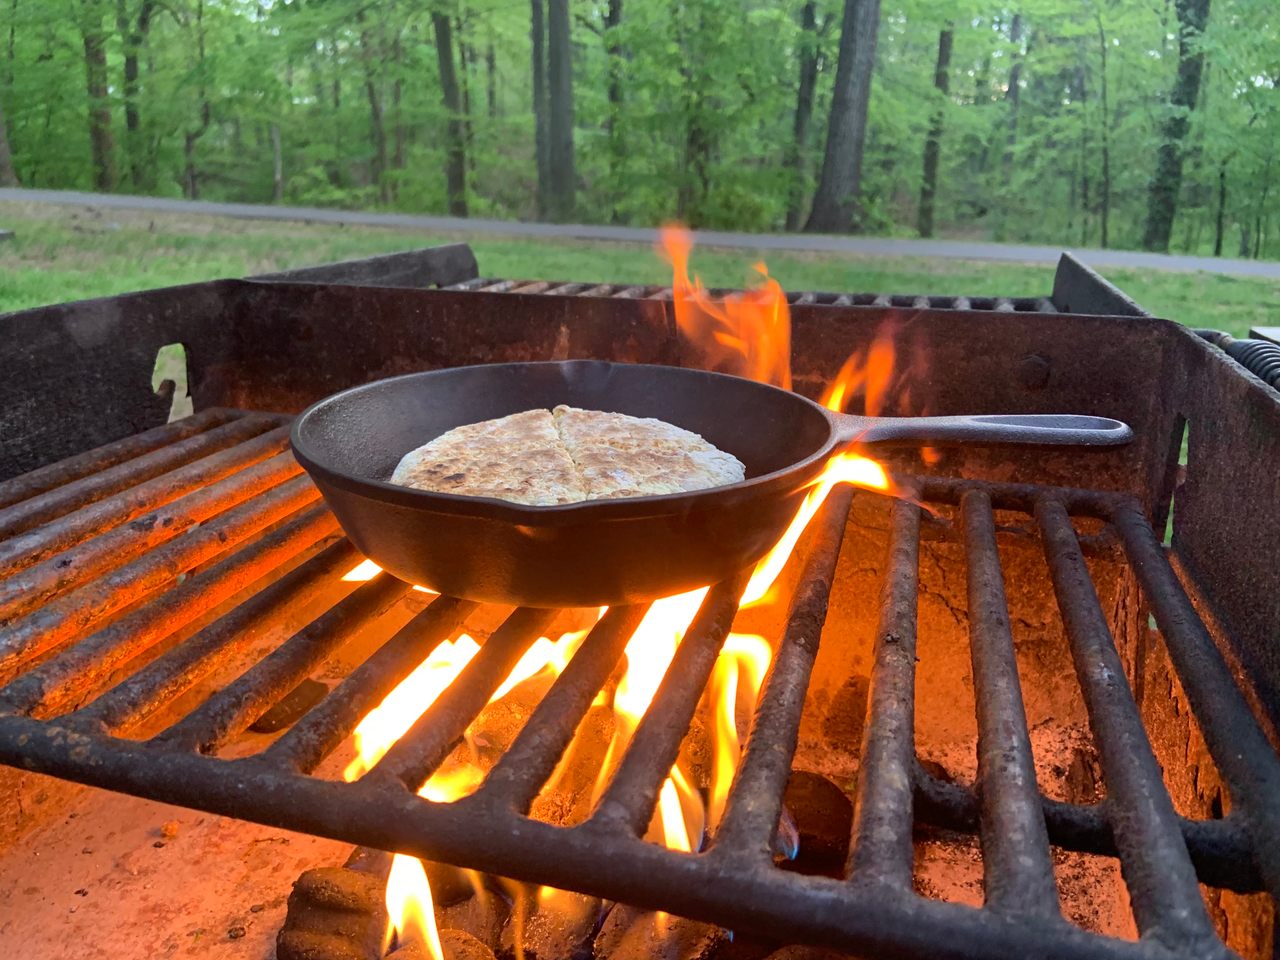 You can cook the bannock on the stove or, in the true spirit of Beltane, over an open flame.